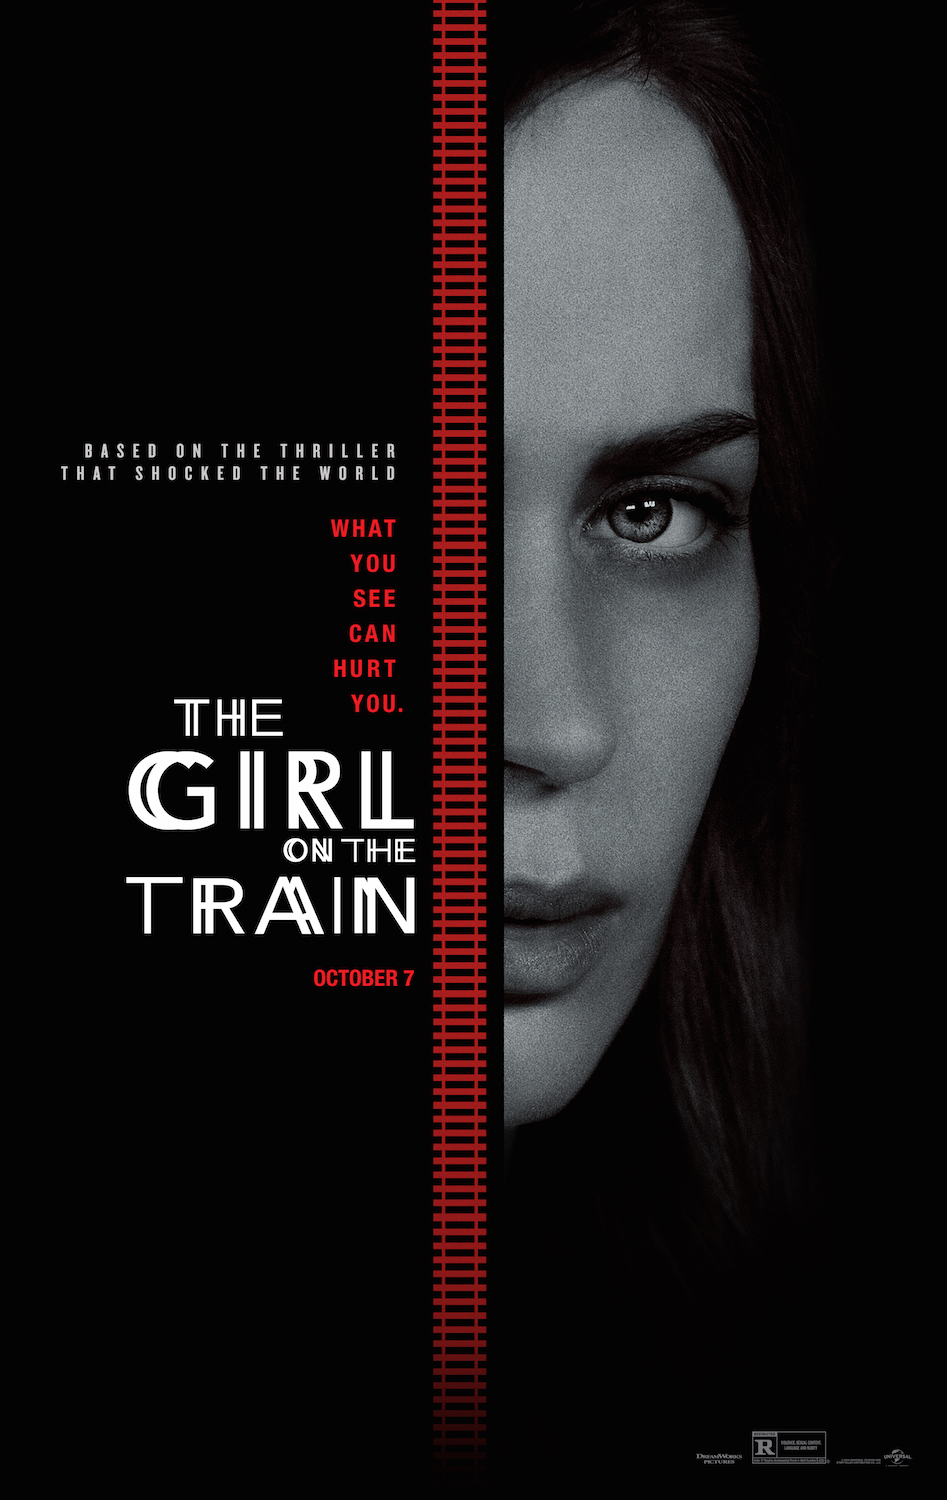 New Trailer for ‘The Girl on the Train’